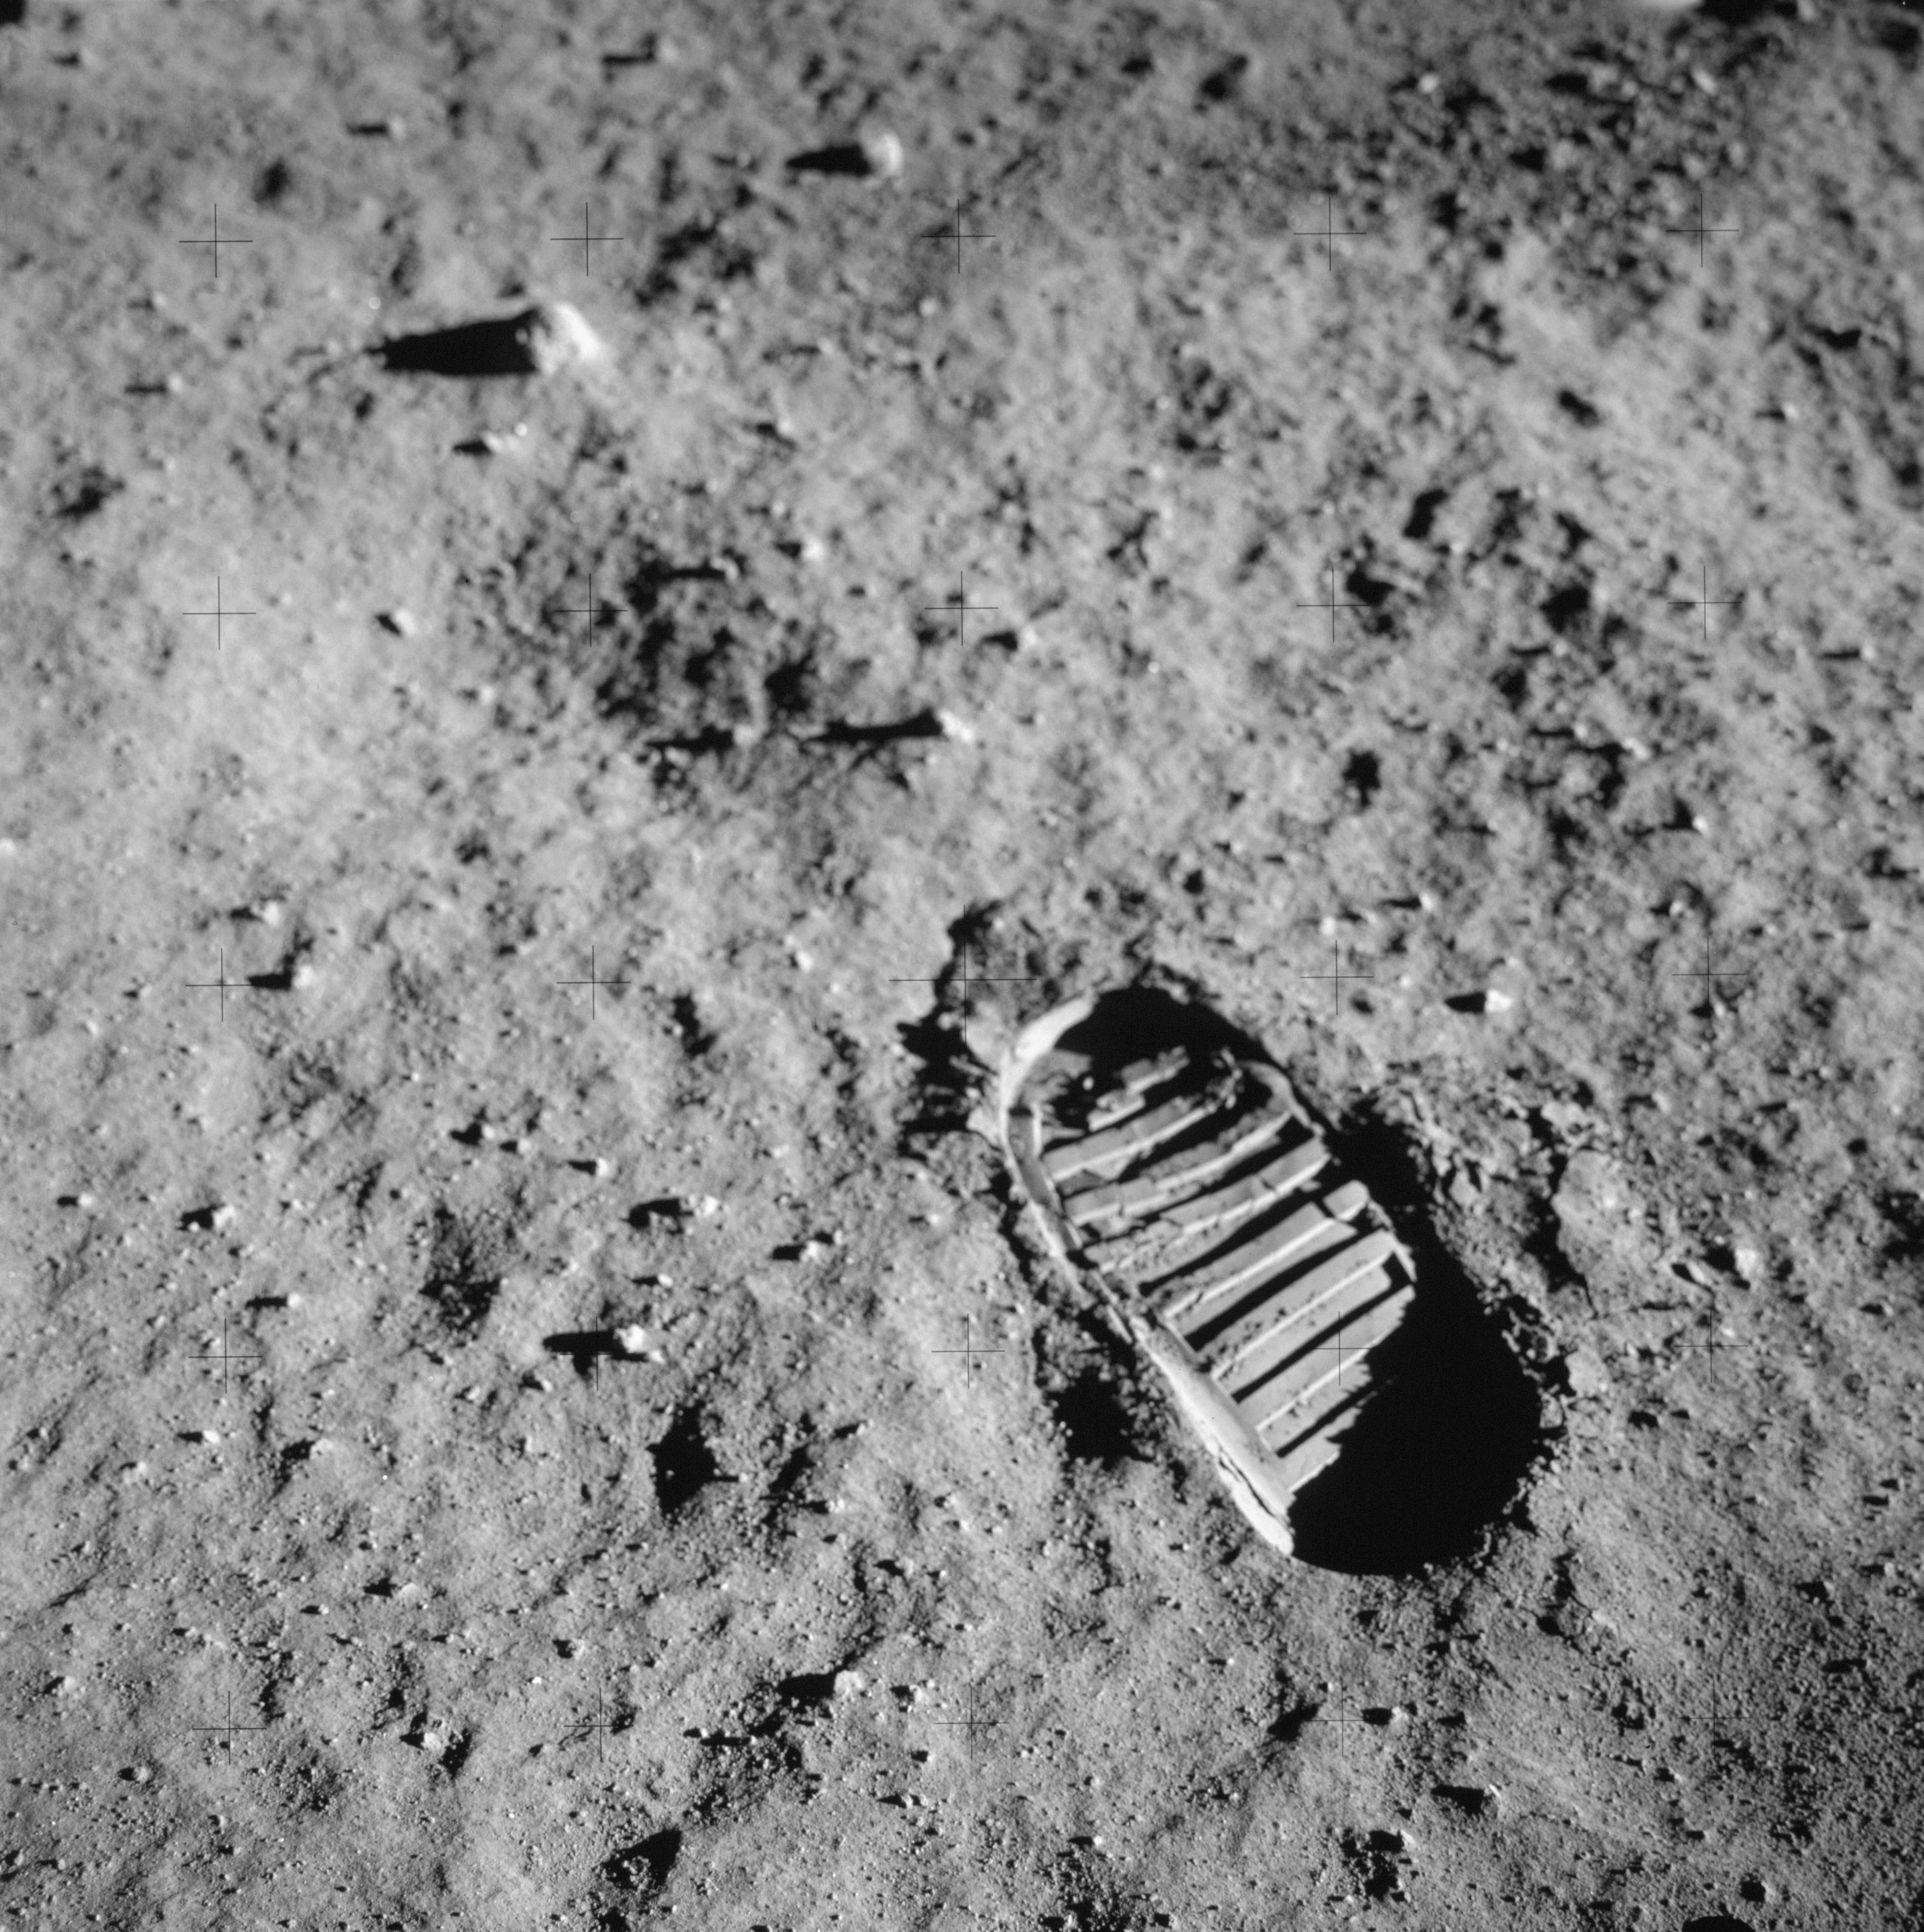 A striped bootprint is pressed into the powdery lunar soil.